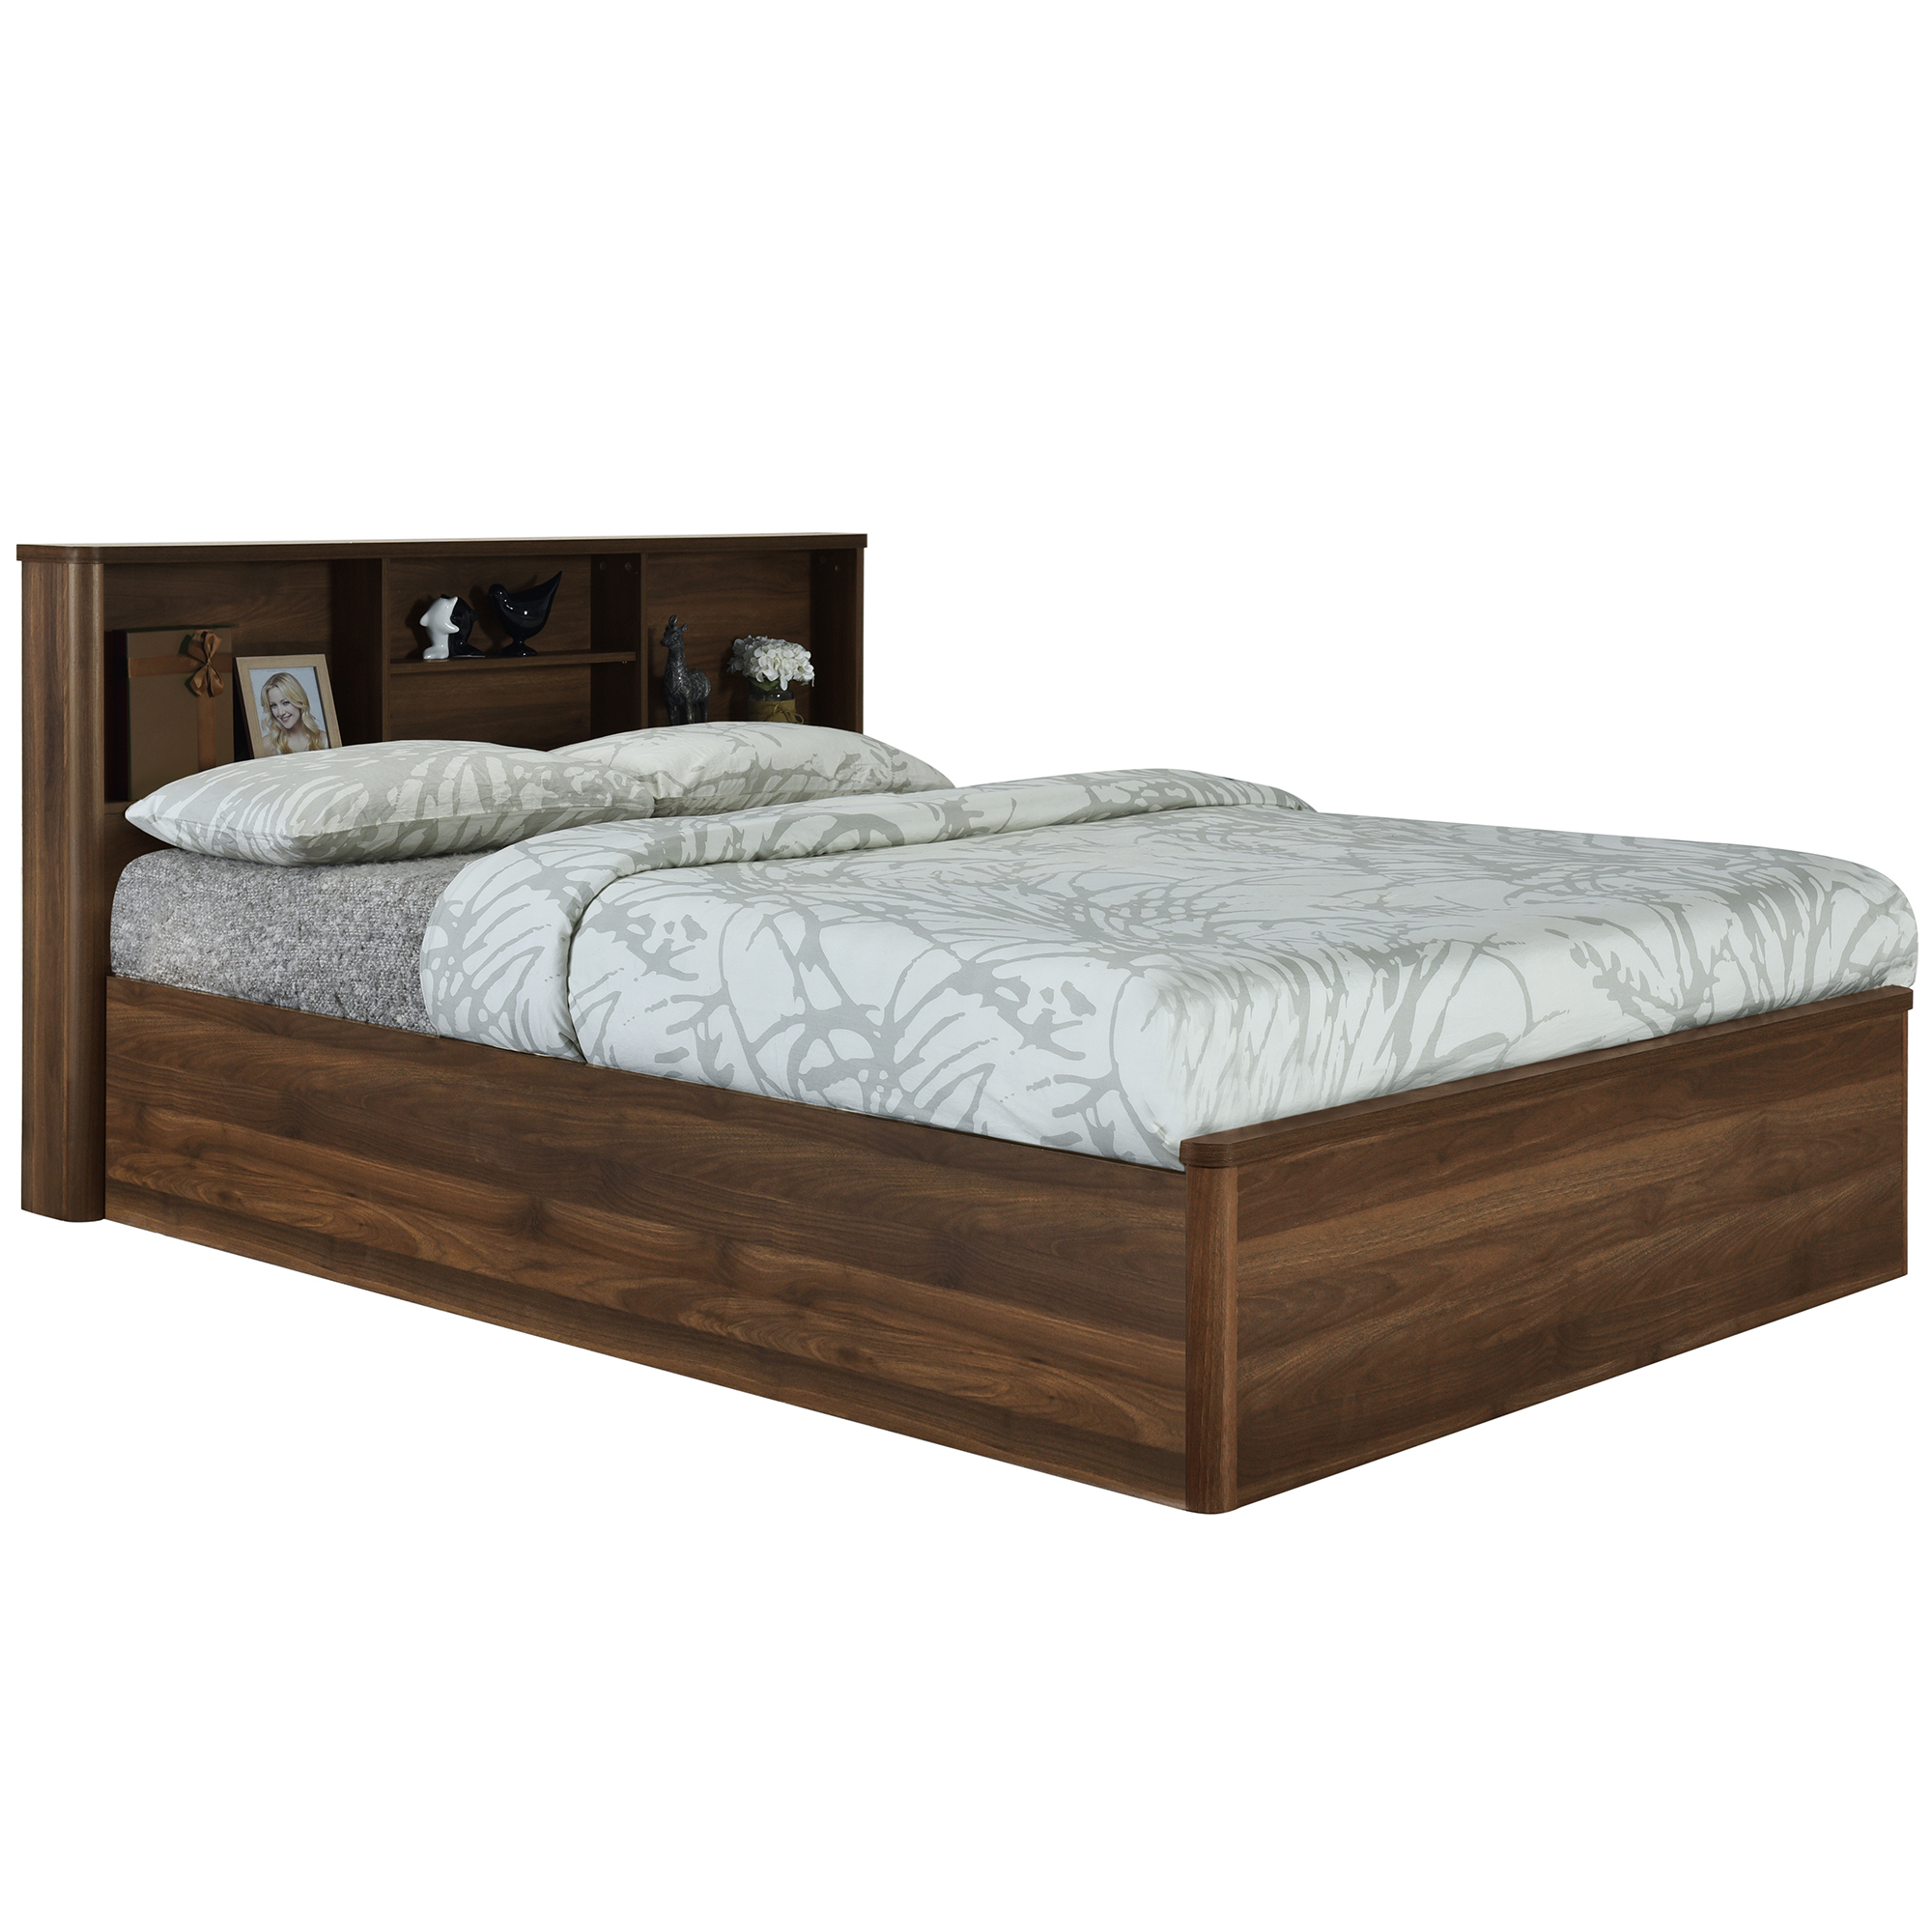 Core Living Anderson Queen Bed With, Bed With Drawers Underneath And Bookcase Headboard